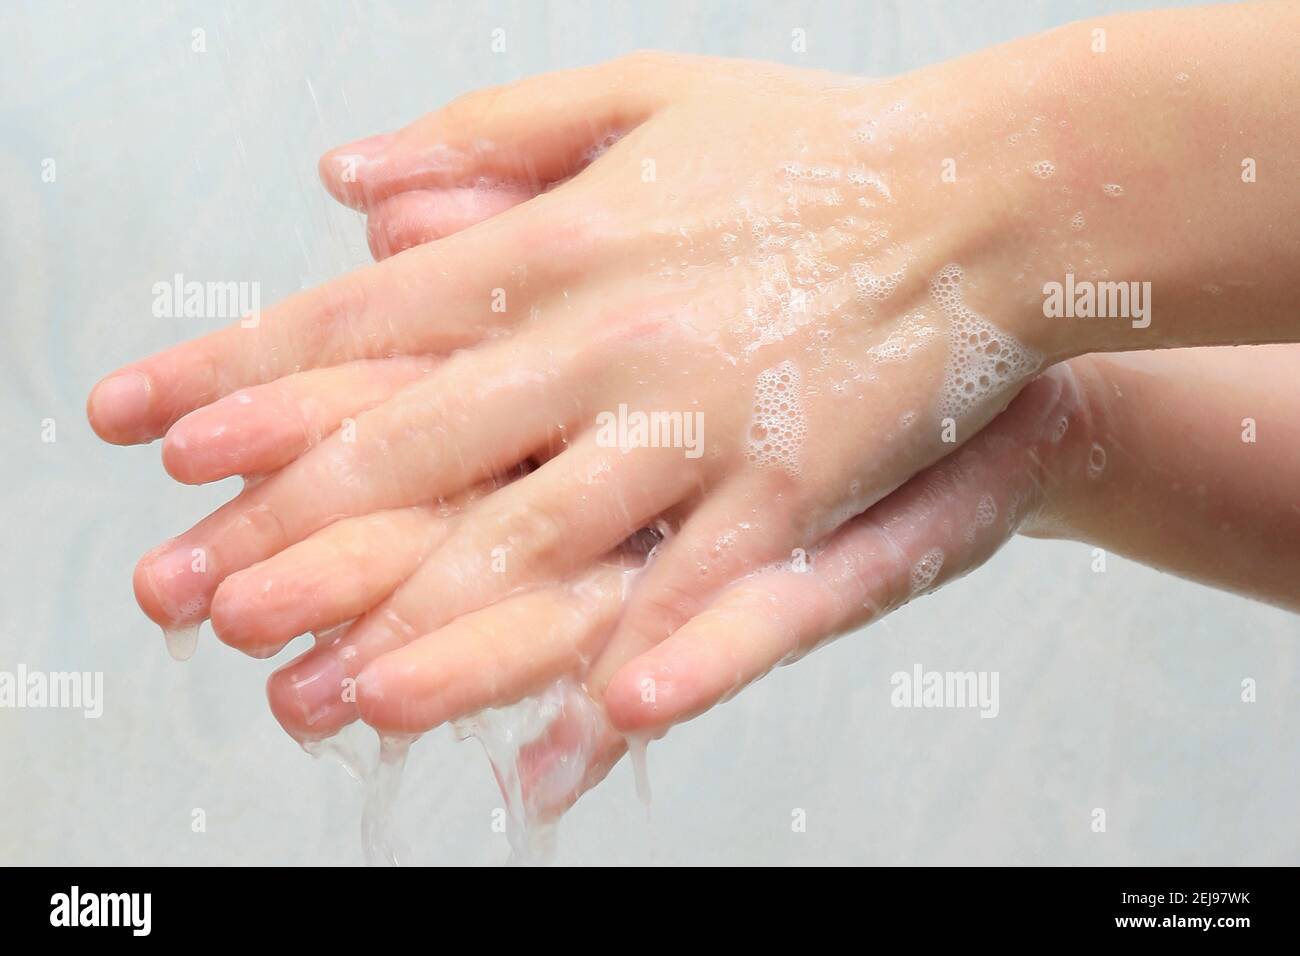 Washing, hand cleaning Stock Photo